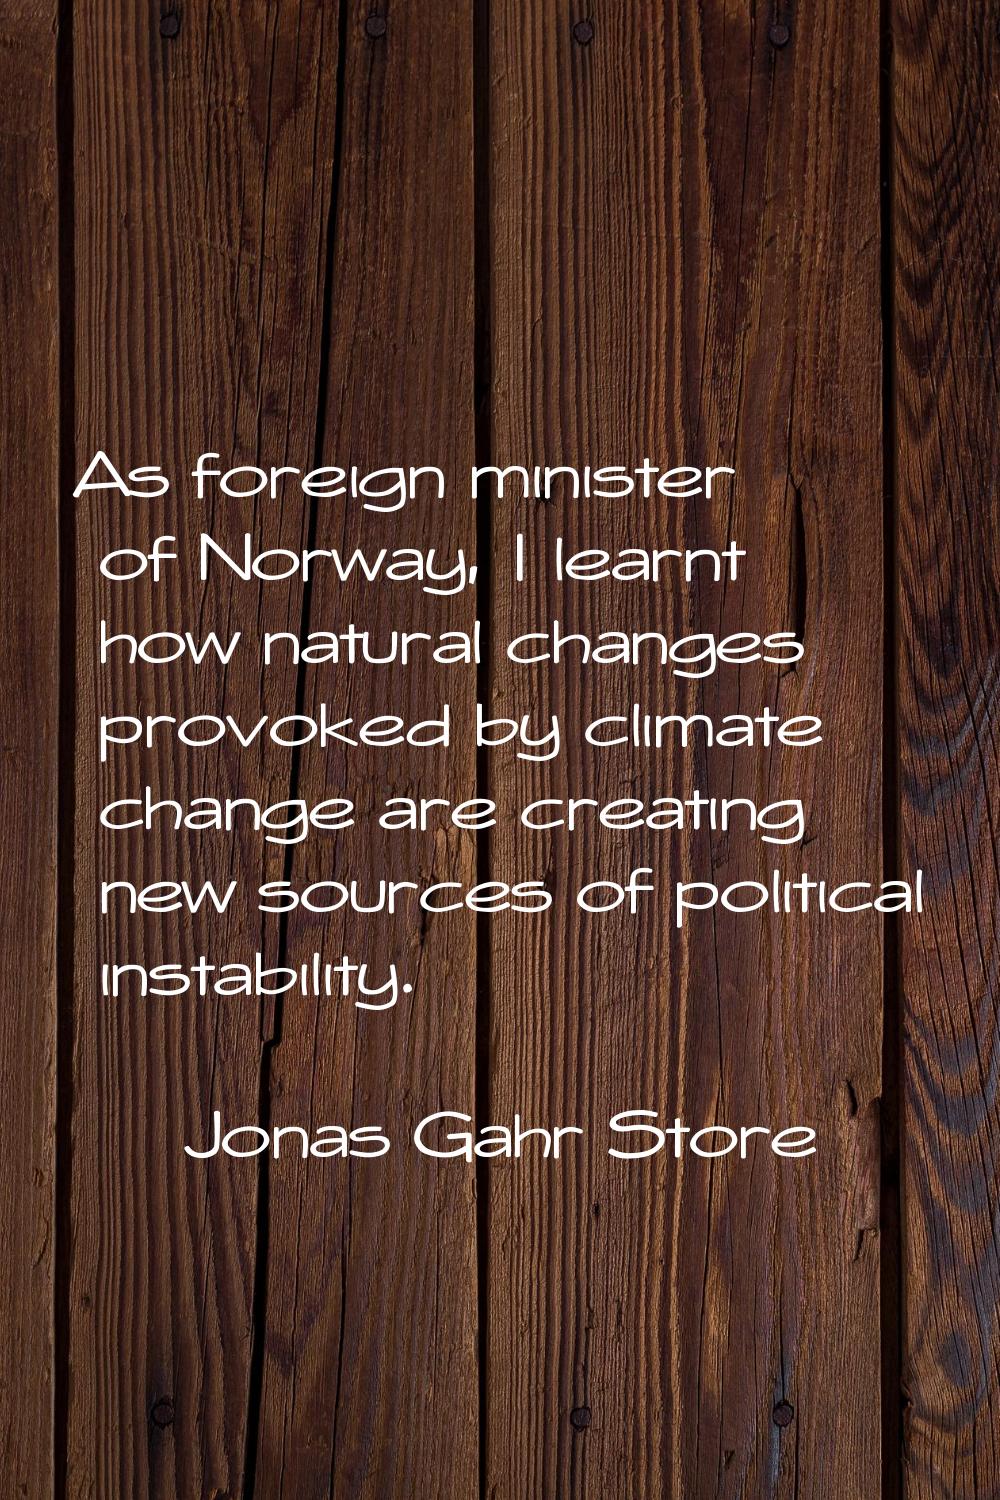 As foreign minister of Norway, I learnt how natural changes provoked by climate change are creating